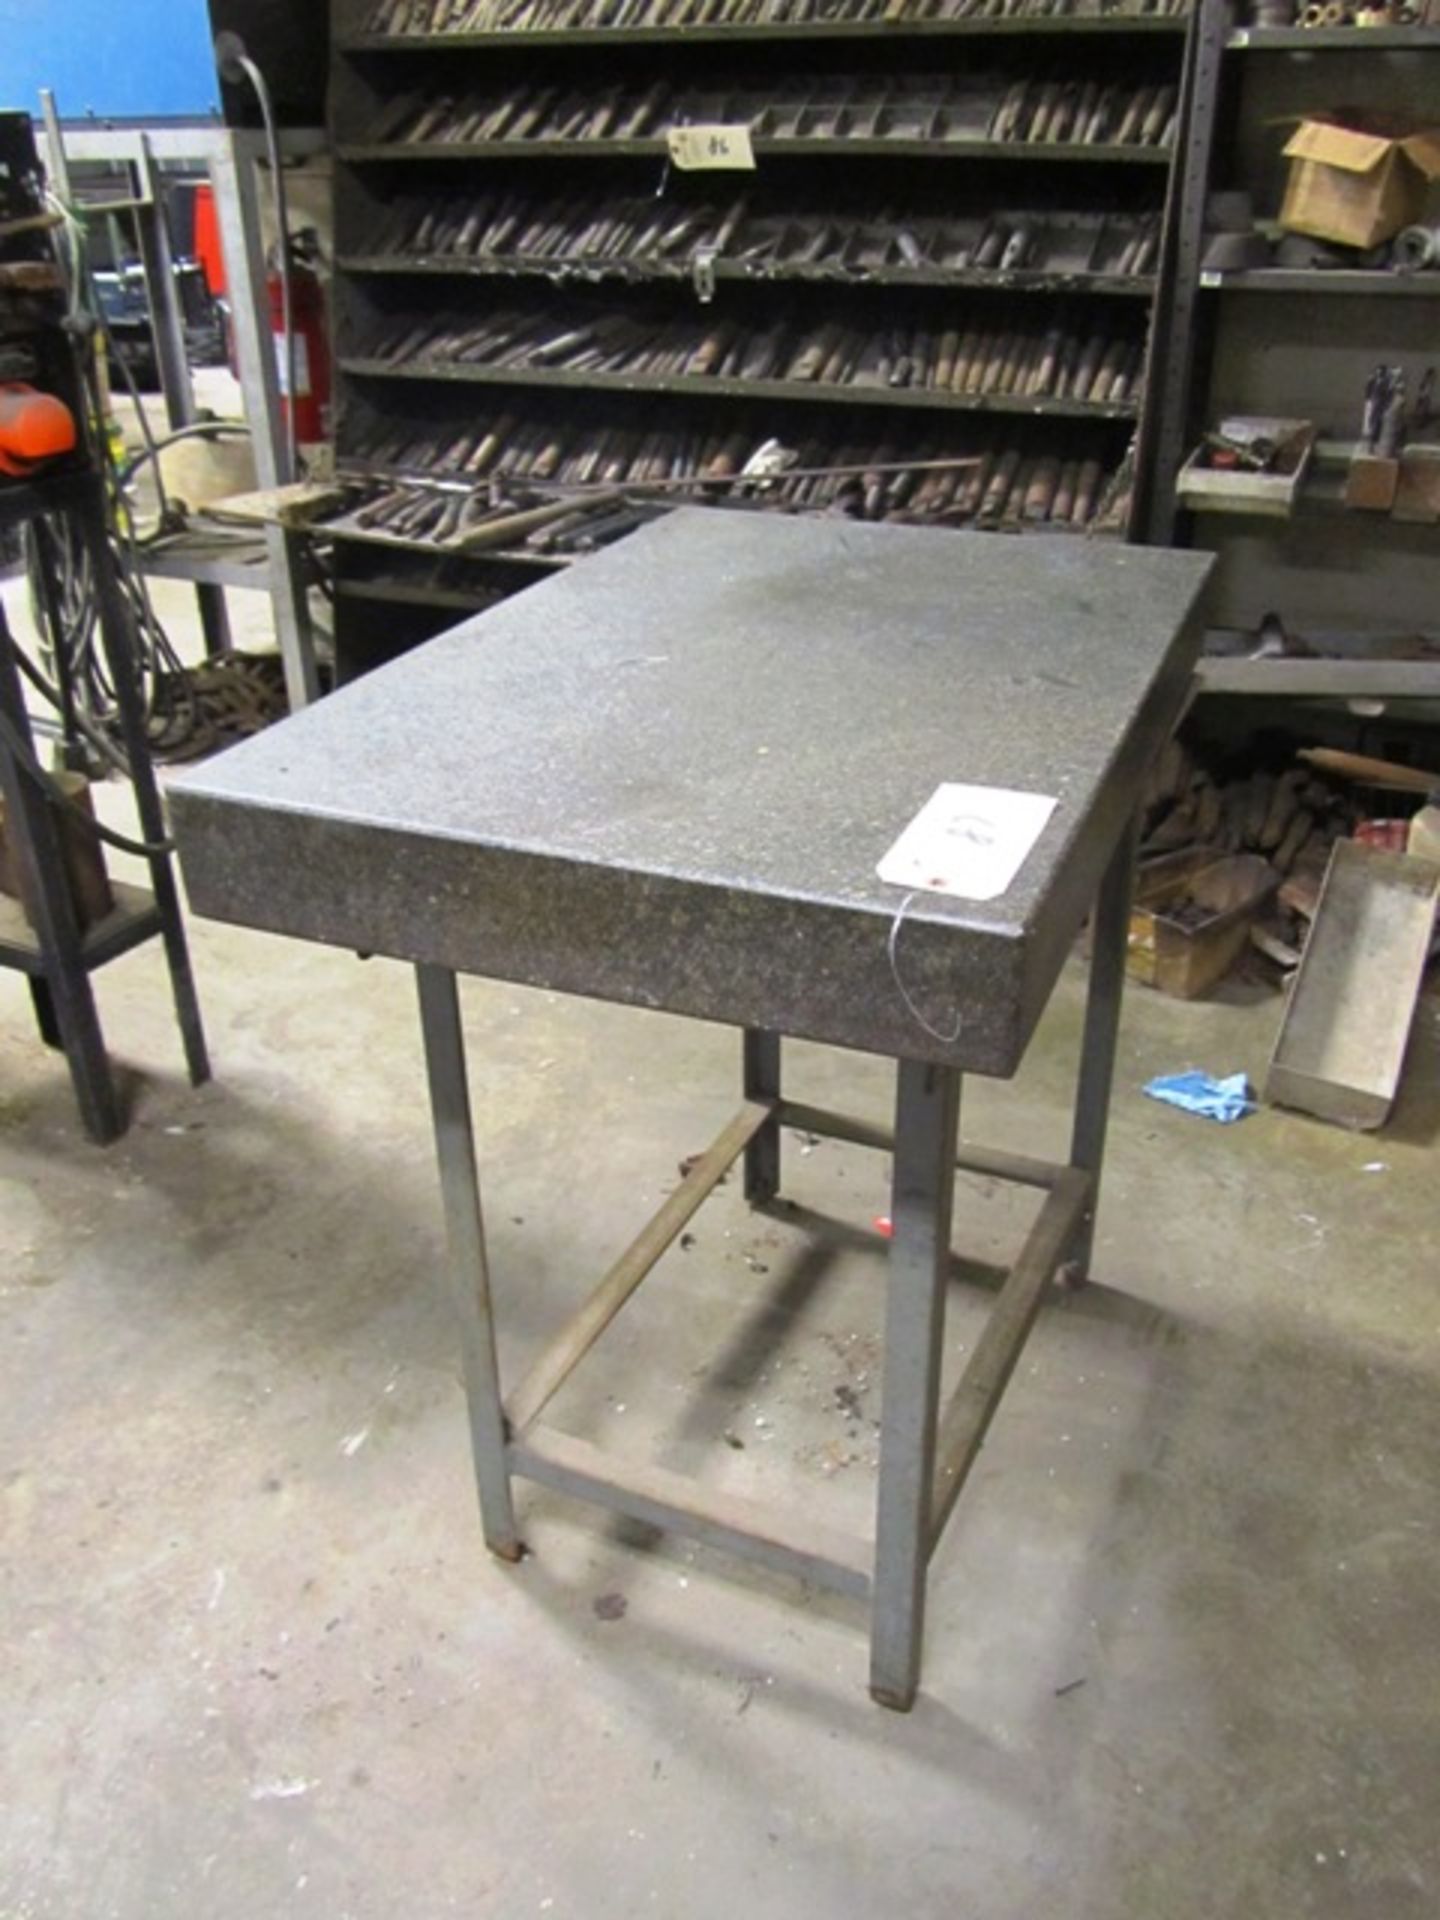 DoAll 24'' x 36'' x 4'' Granite Surface Plate with Stand